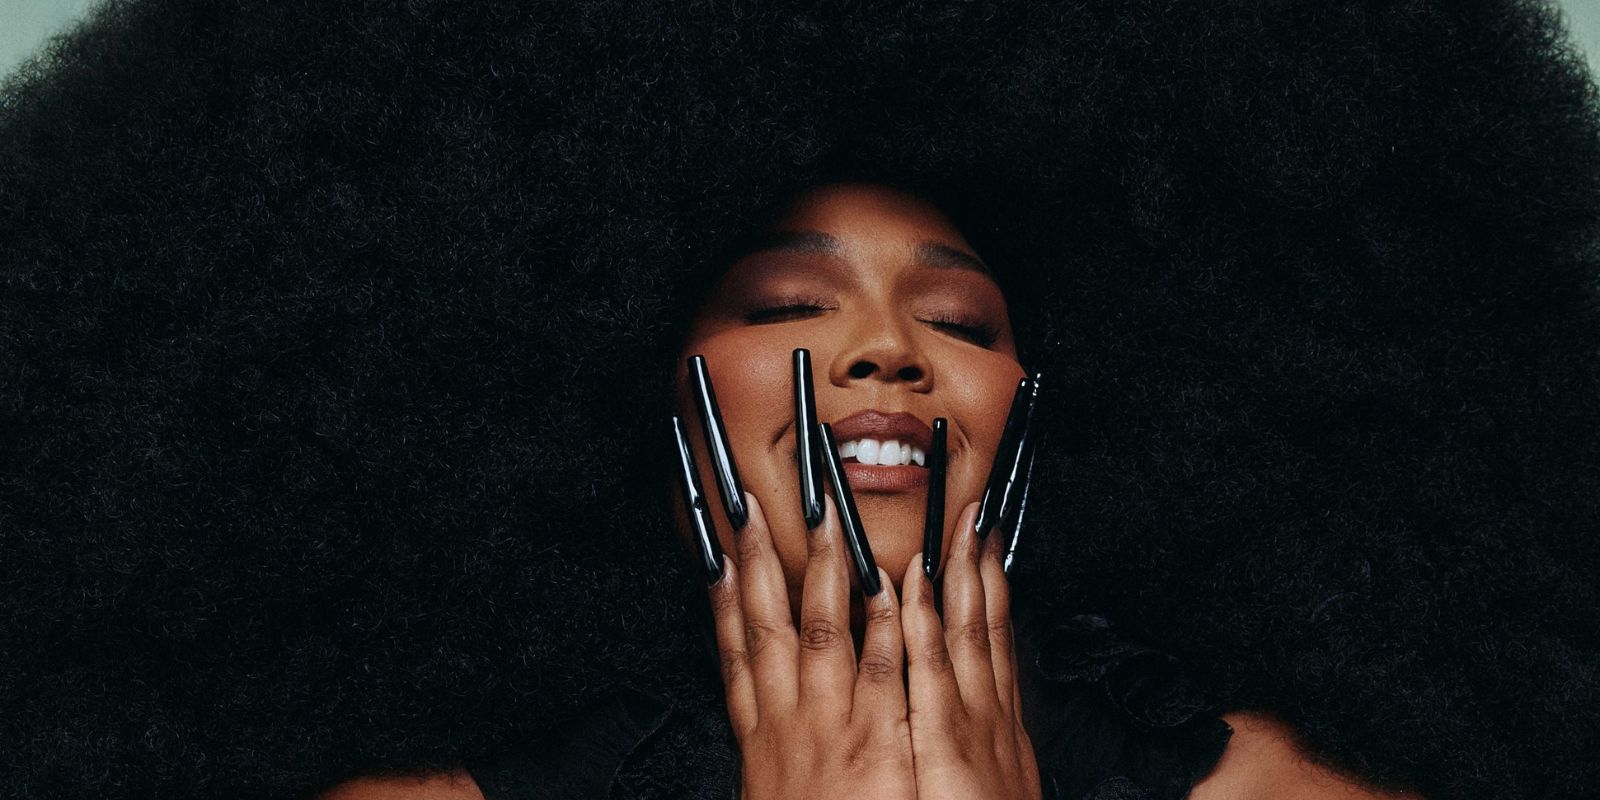 Lizzo will perform at Enterprise Center in St. Louis.